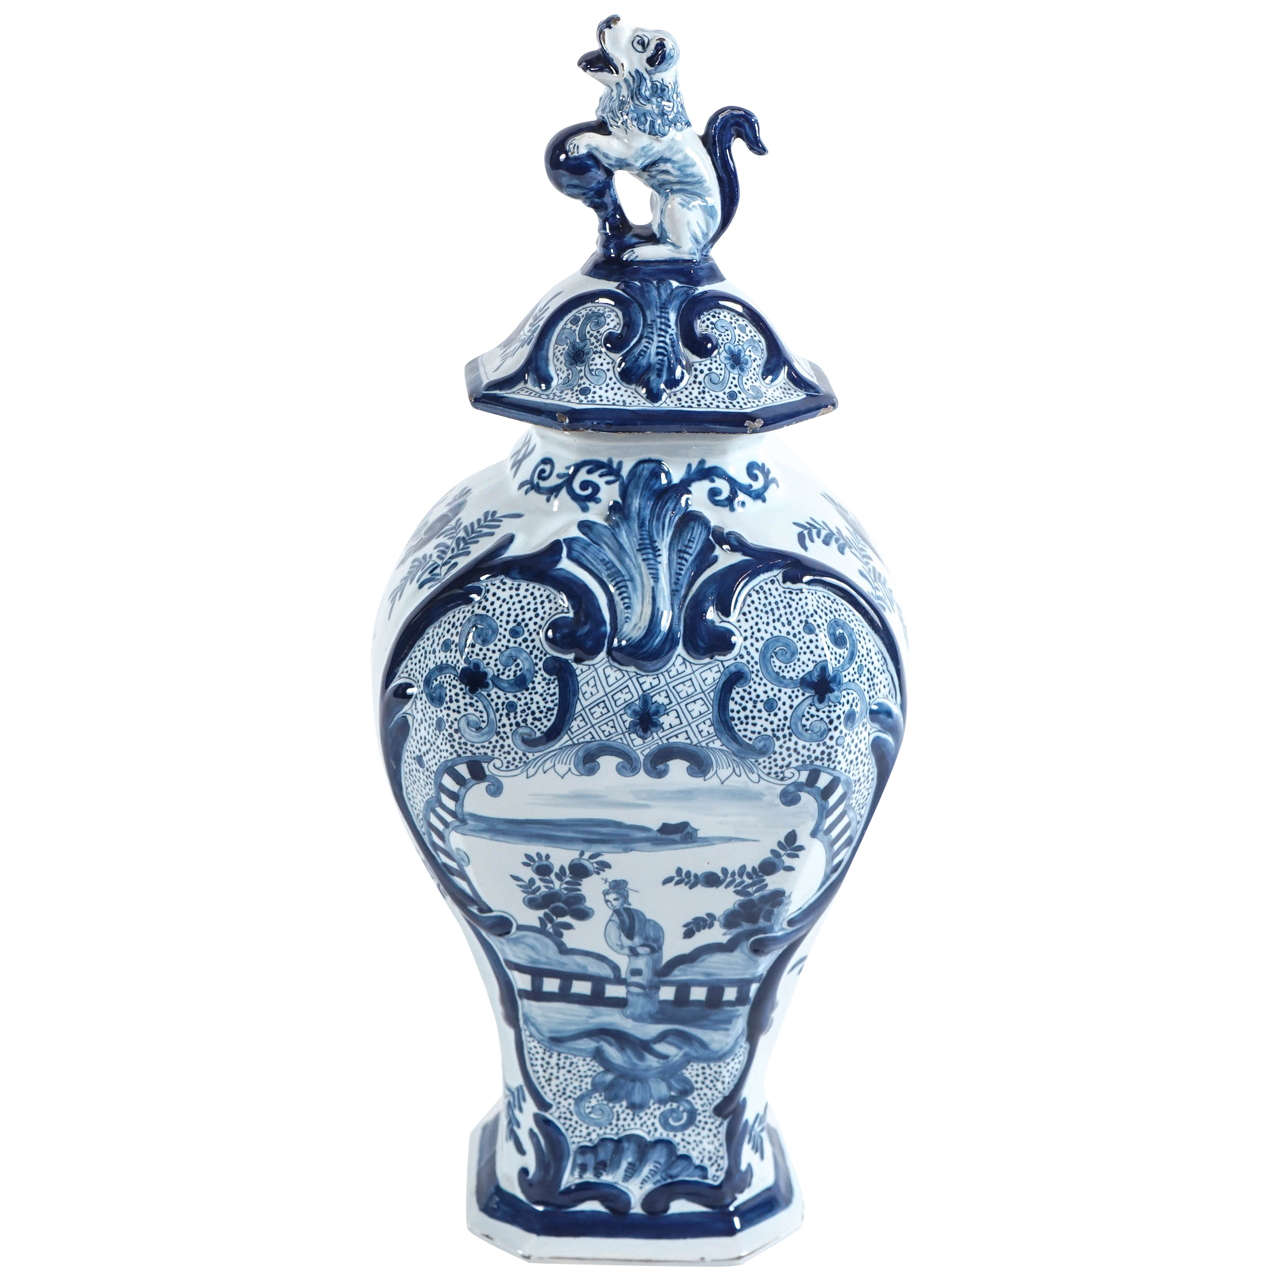 Large Blue and White Delft Covered Jar by Johannes Harlees, Holland, circa 1770